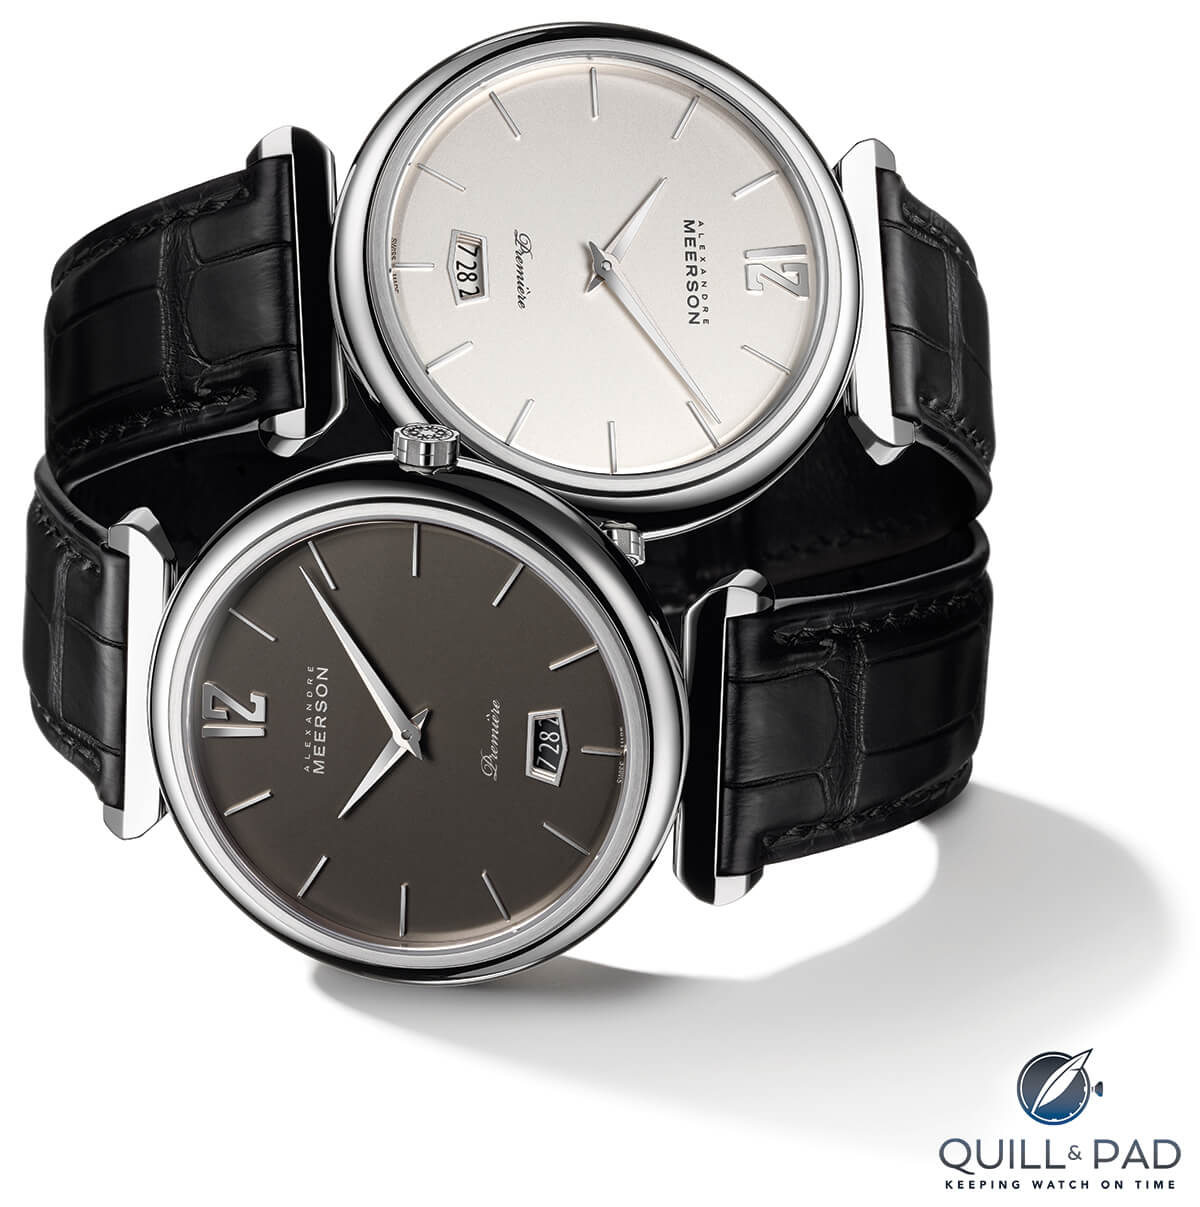 Dark and light dial versions of the Alexandre Meerson Altitude Première with date